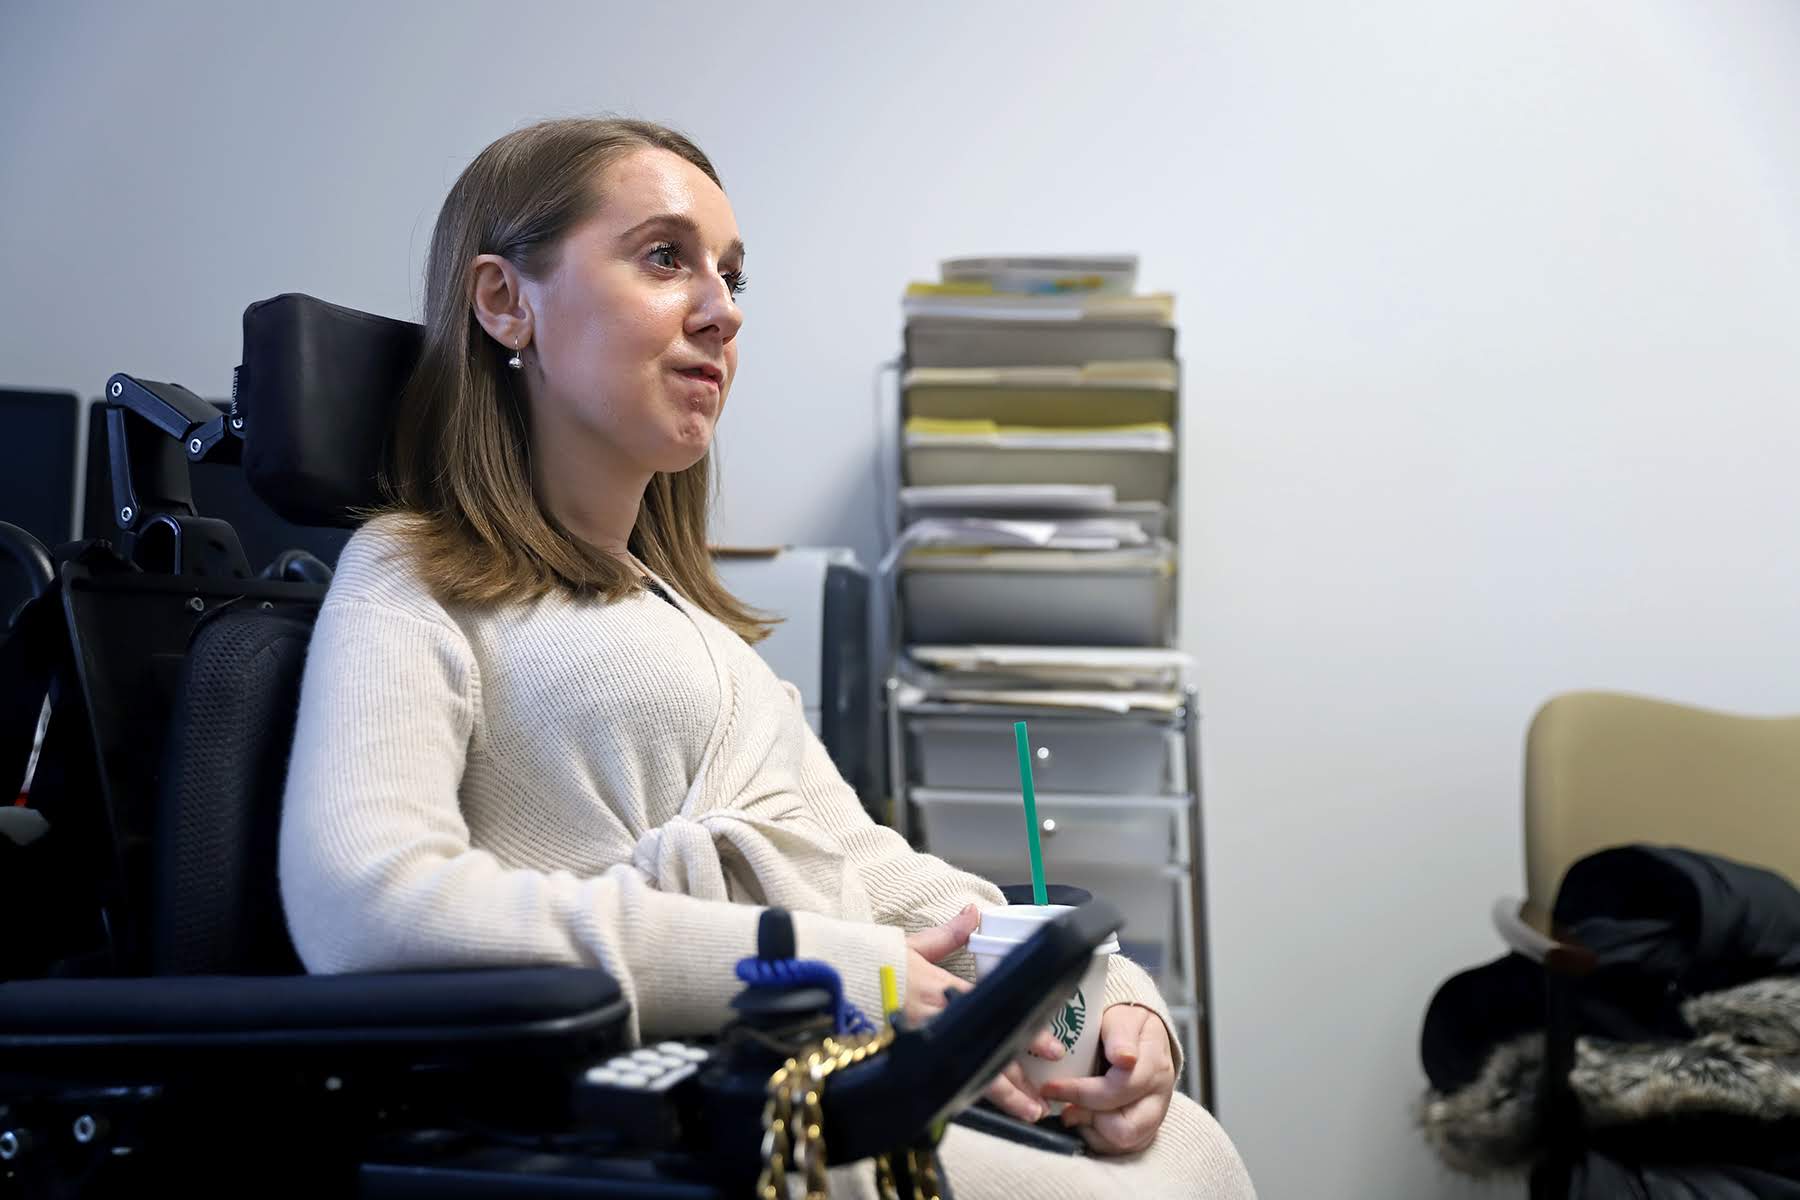 Photograph of Heather Tomko in her office. She is sitting in her wheelchair and holding a cup of coffee with a straw. Behind her are files, papers and folders.